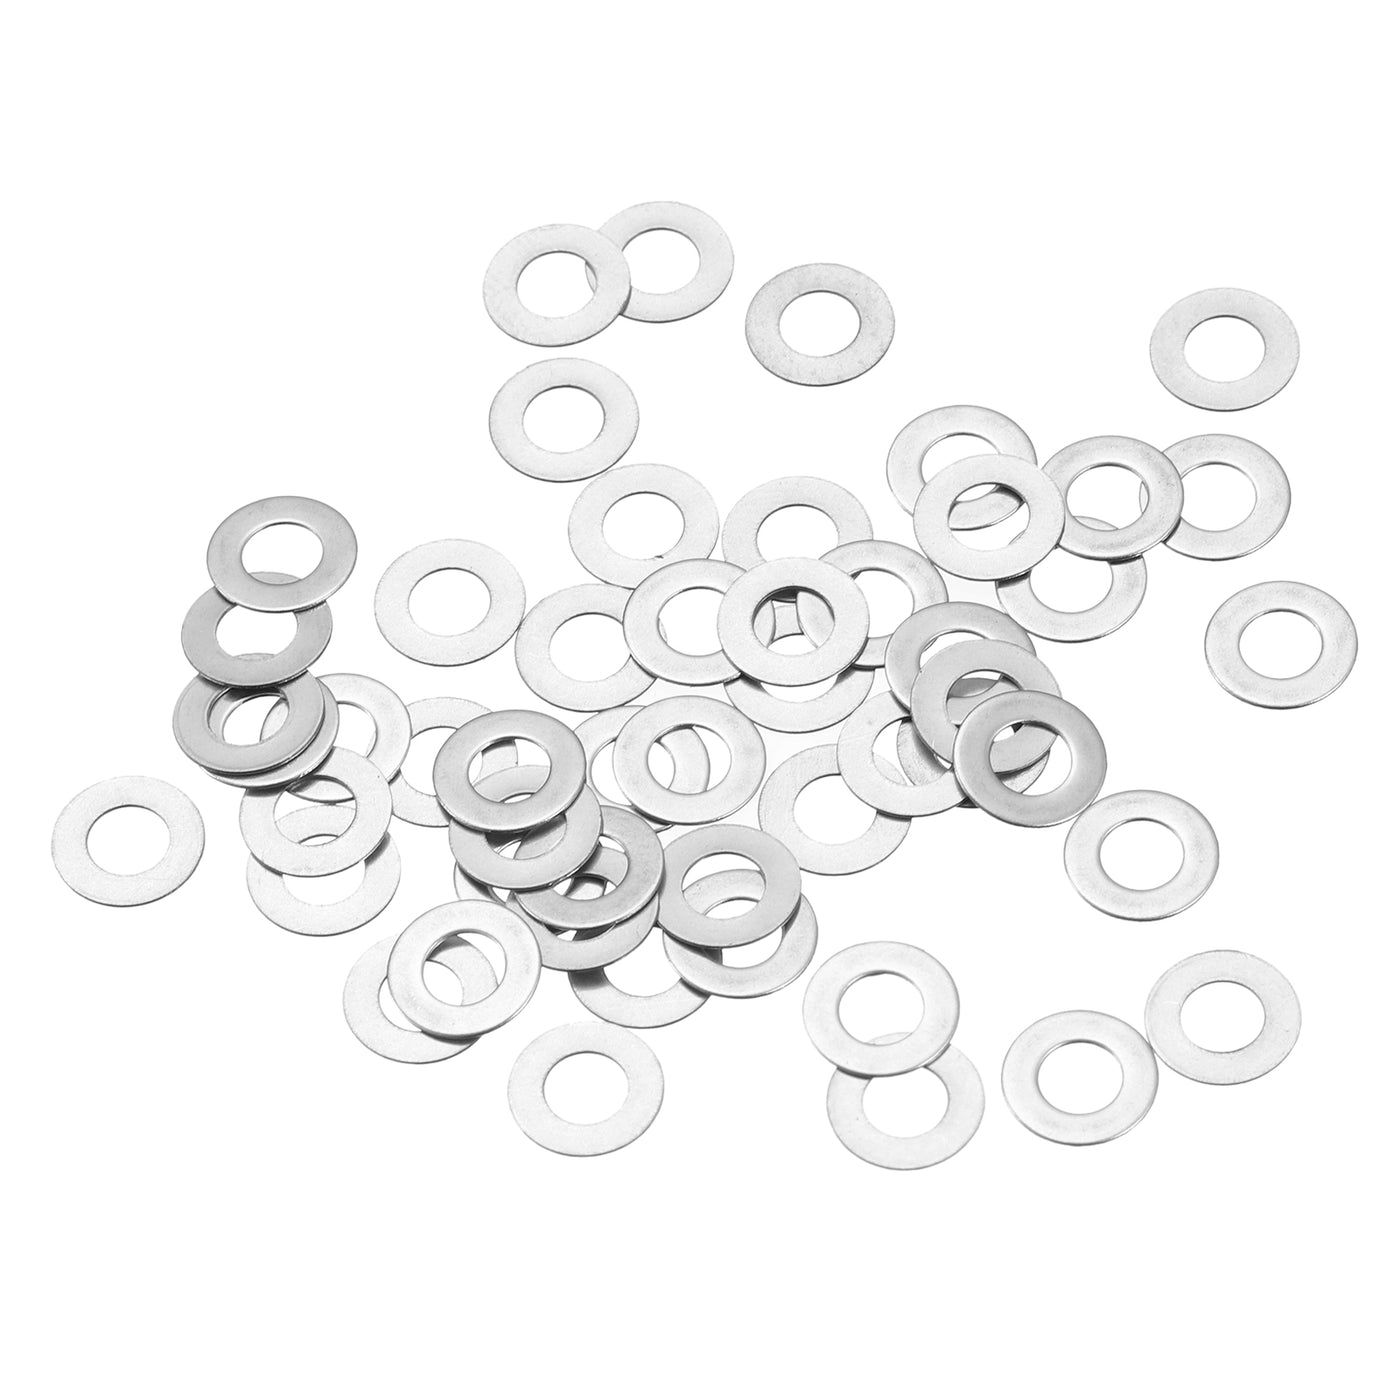 uxcell Uxcell M4 304 Stainless Steel Flat Washers, 50pcs 4x8x0.5mm Ultra Thin Flat Spacers